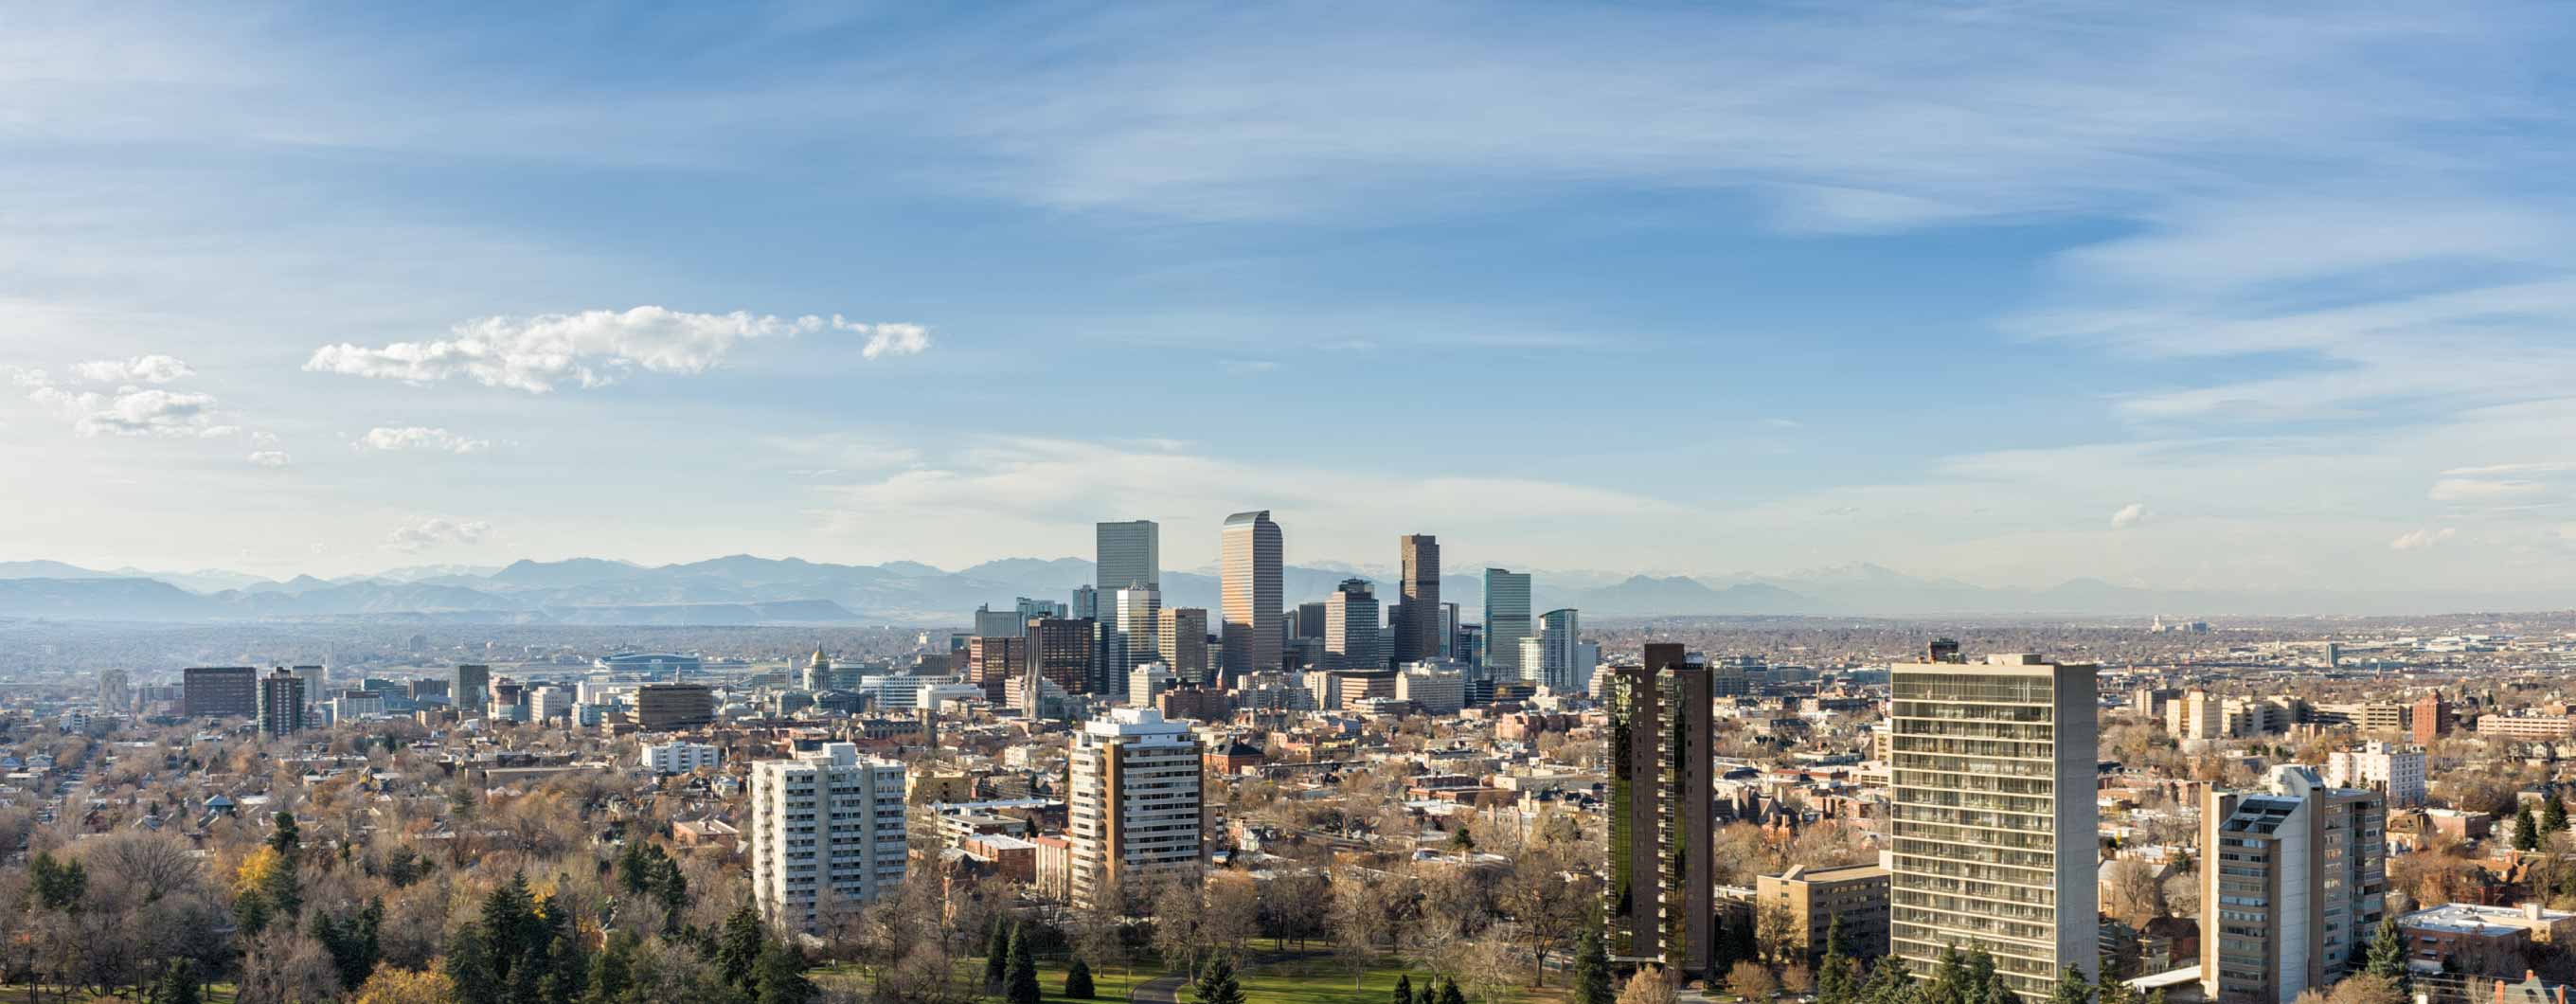 Image of the Denver city skyline with clouds and mountains in the background